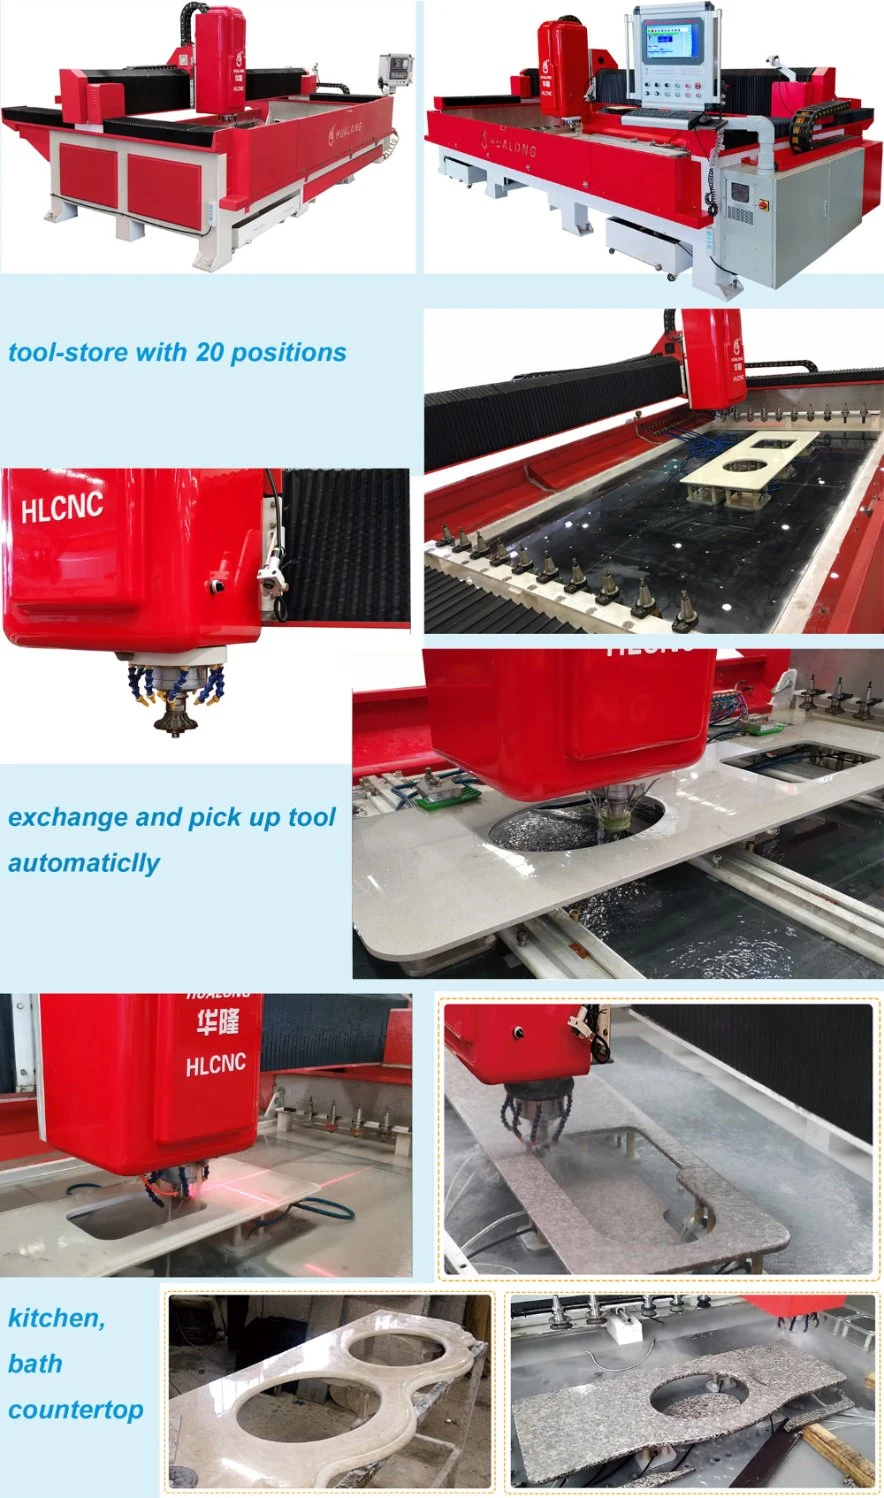 Hlcnc-3319 3D Stone Marble Engraving CNC Routers Processing Center for Countertop Stone Polishing Machine Milling and Drilling for Bathroom Basin Siemens